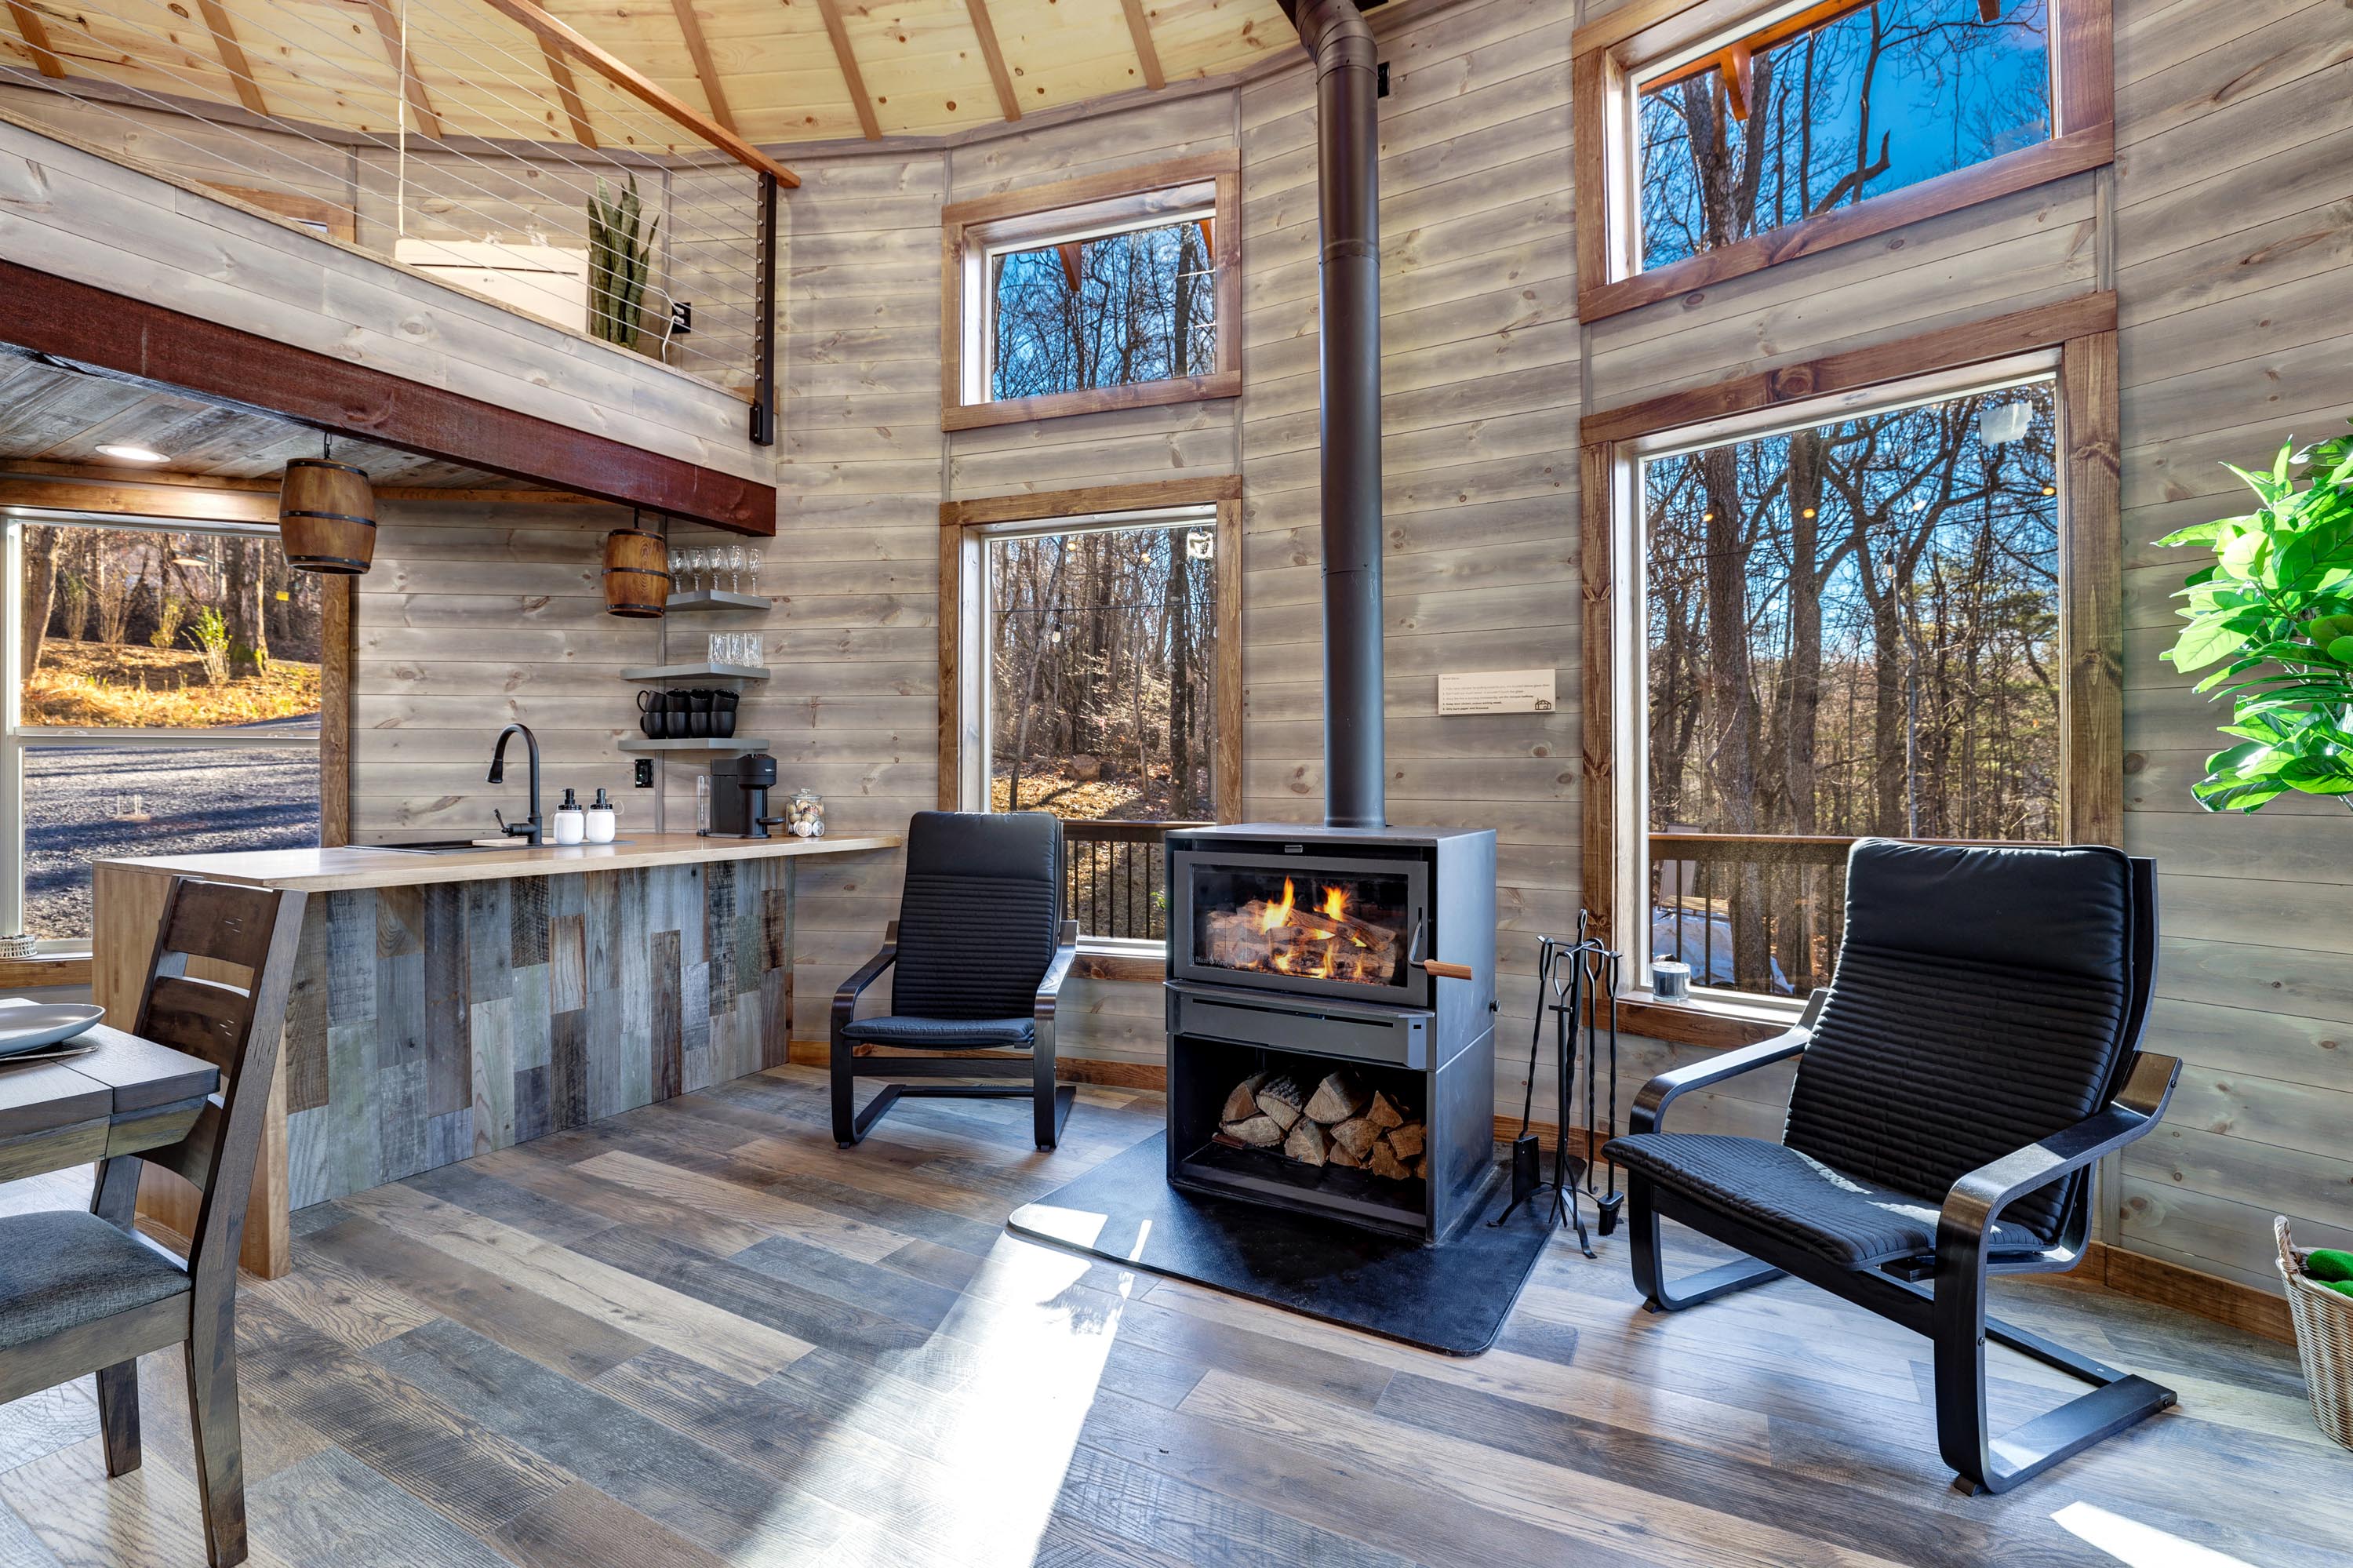 <span  class="uc_style_uc_tiles_grid_image_elementor_uc_items_attribute_title" style="color:#ffffff;">Two rocking chairs and a wood stove</span>